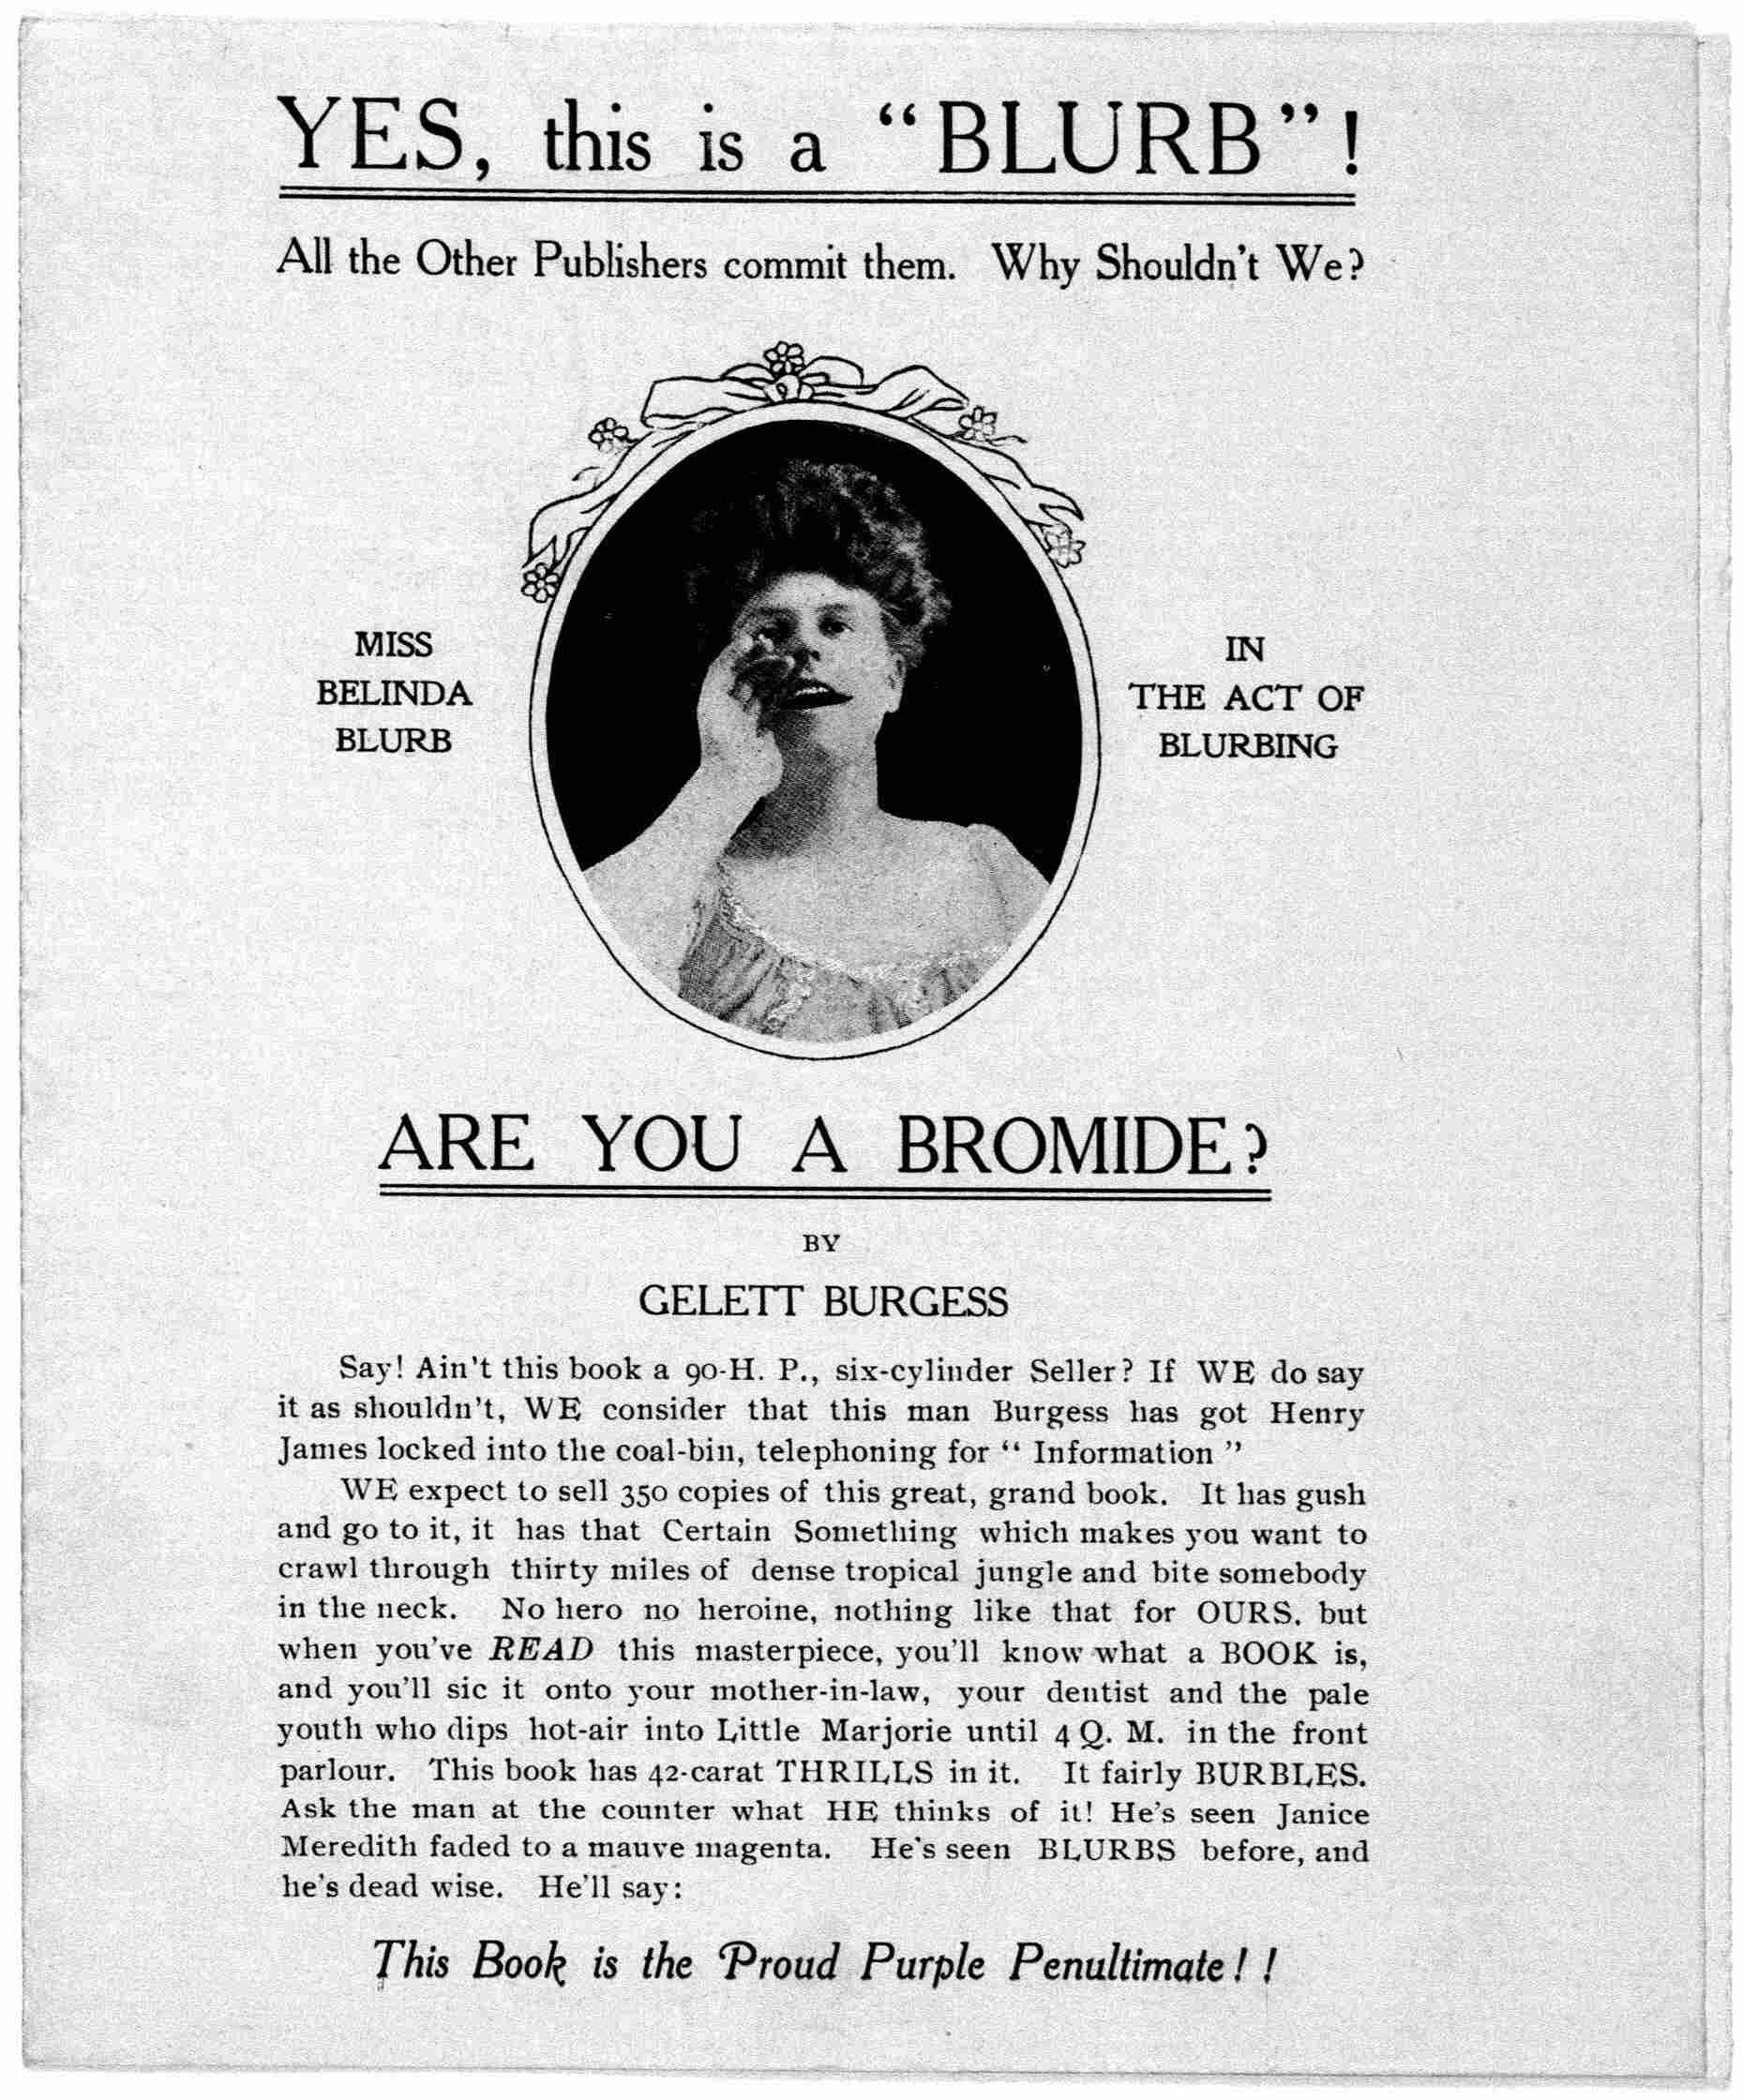 Jacket of Are You a Bromide? by Gelett Burgess; Library of Congress, Rare Book and Special Collections Division, Printed Ephemera Collection. https://www.loc.gov/resource/rbpe.24203600/?sp=1